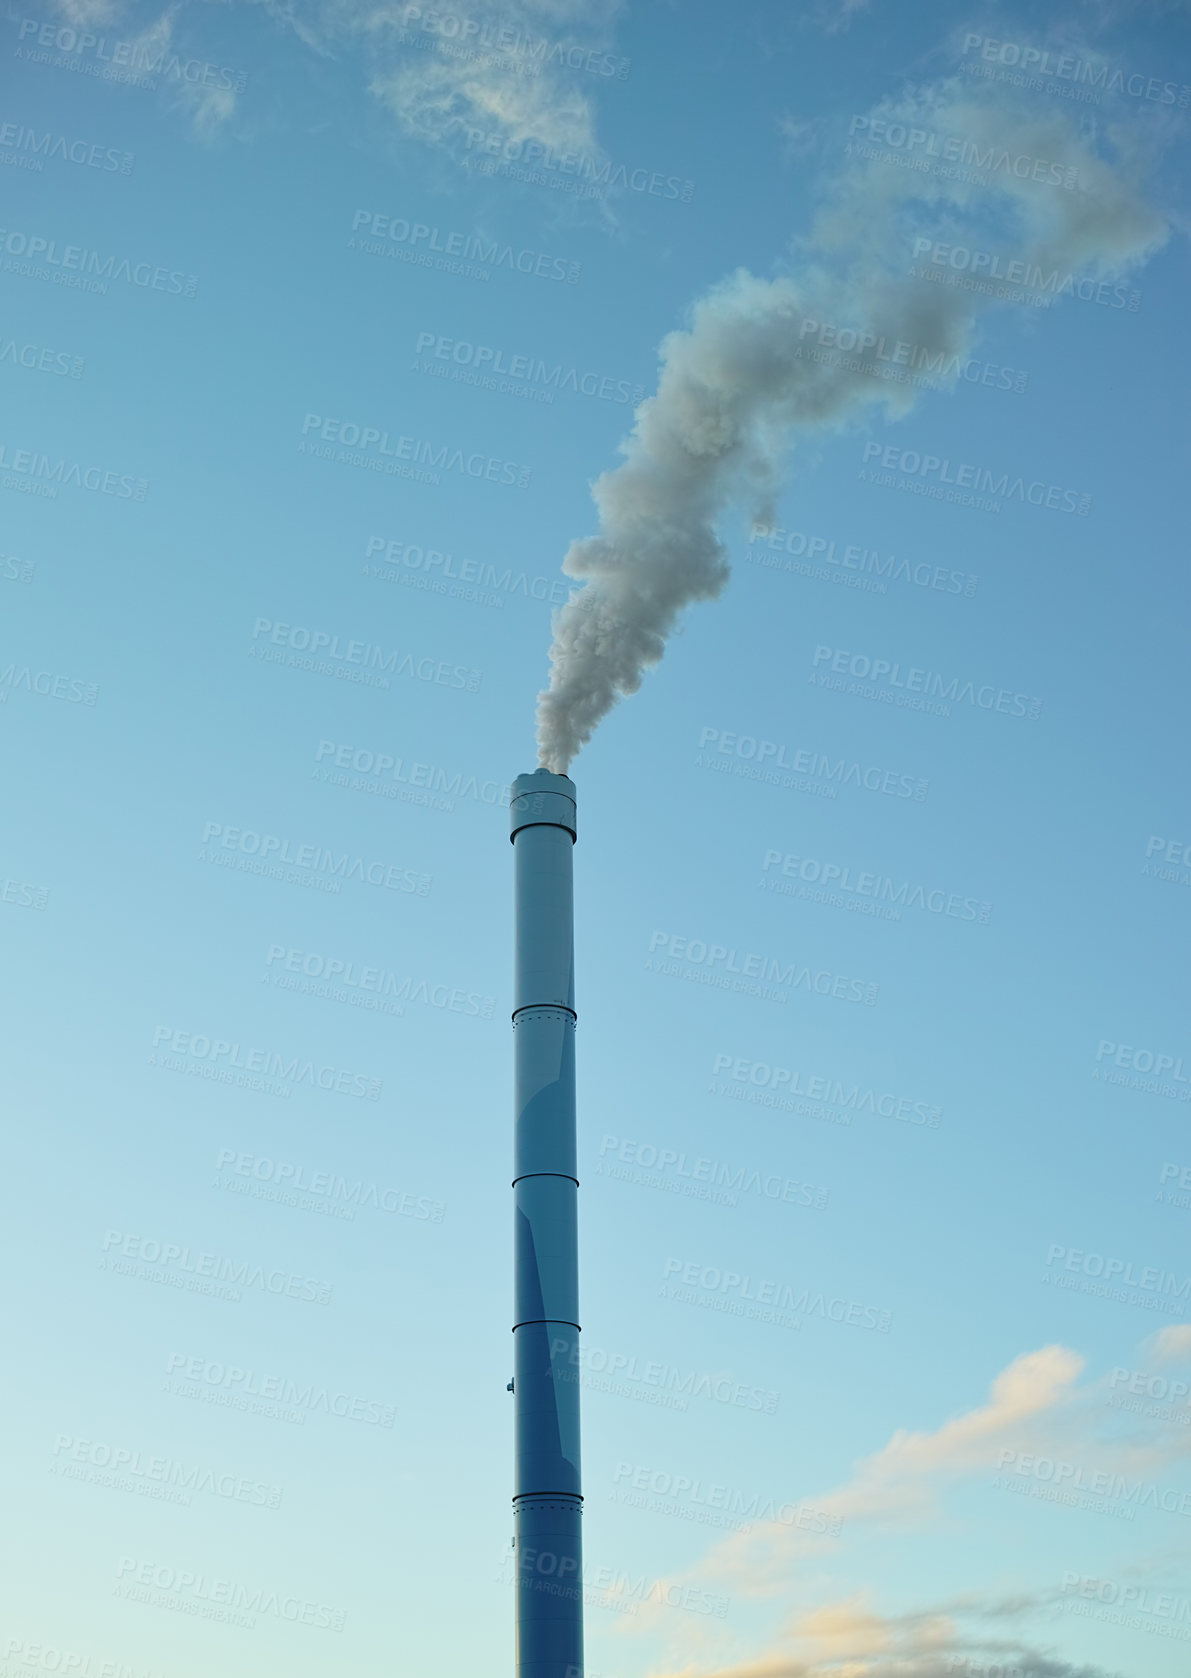 Buy stock photo A factory chimney with smoke billowing into the air. Large amounts of steam or smoke billowing from an industrial smoke stack, adding to pollution and air contamination from big industrial industries